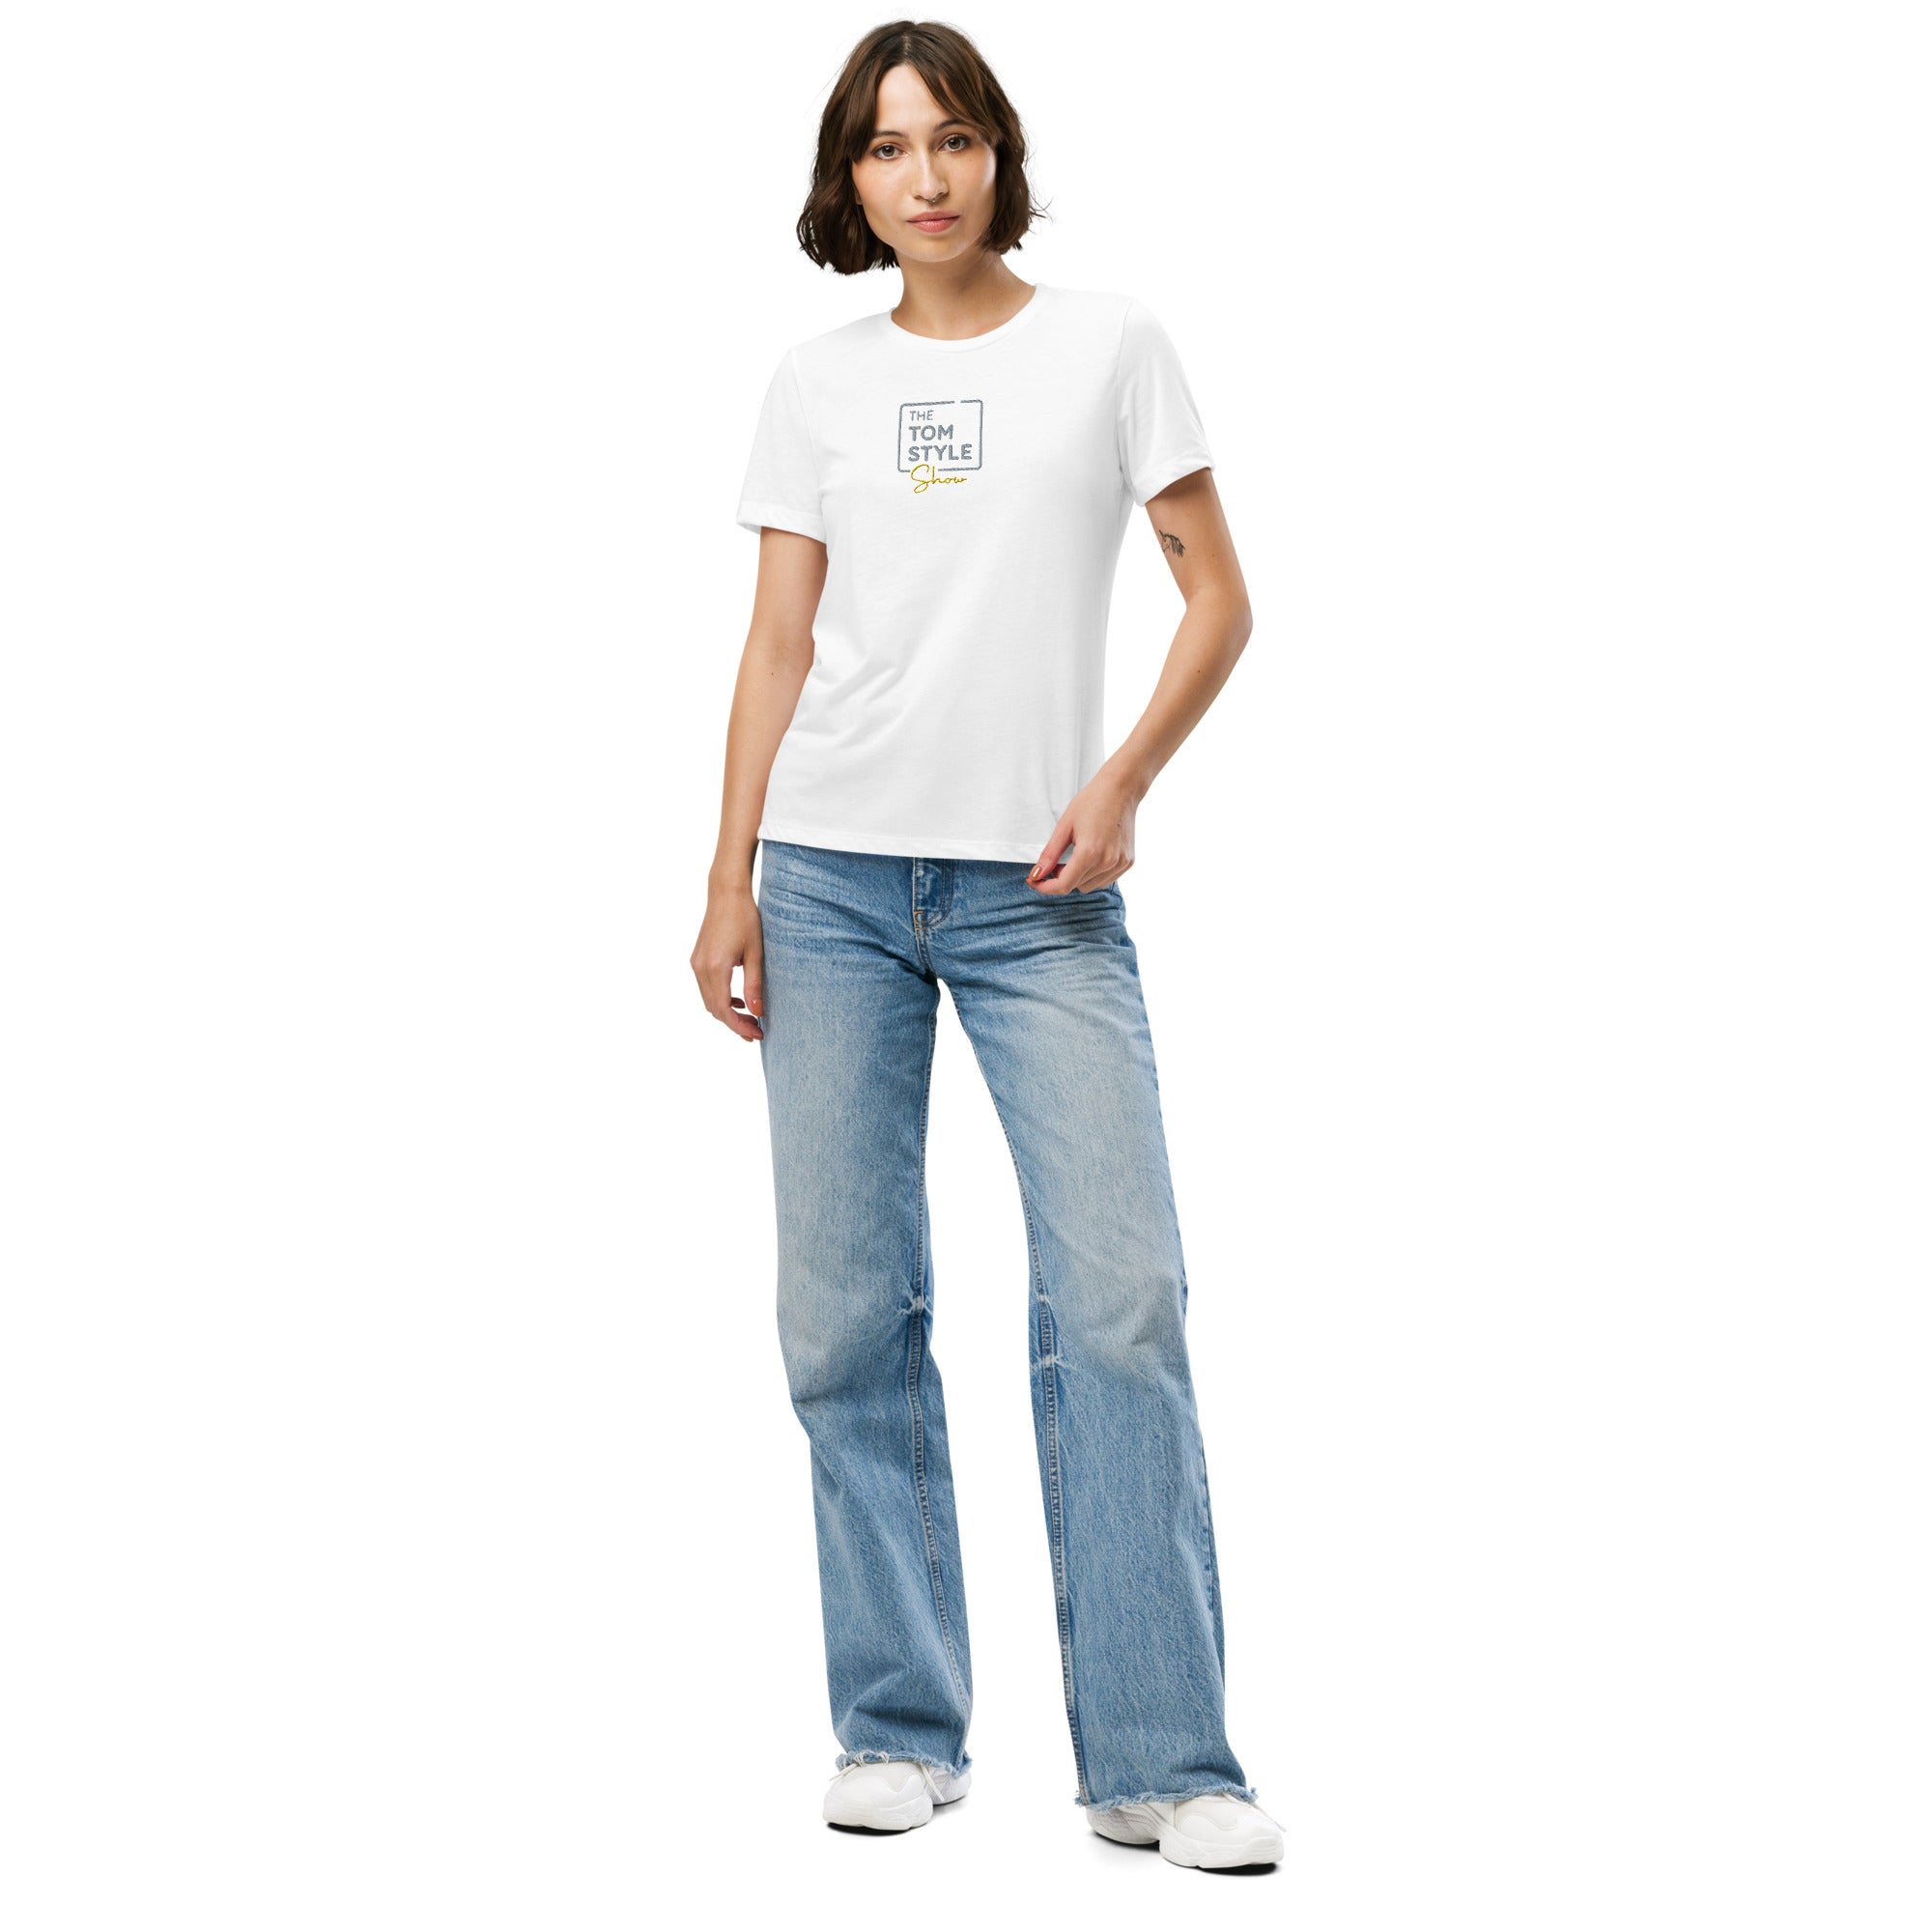 Women’s Relaxed Tri-blend T-shirt - Tom Style Show